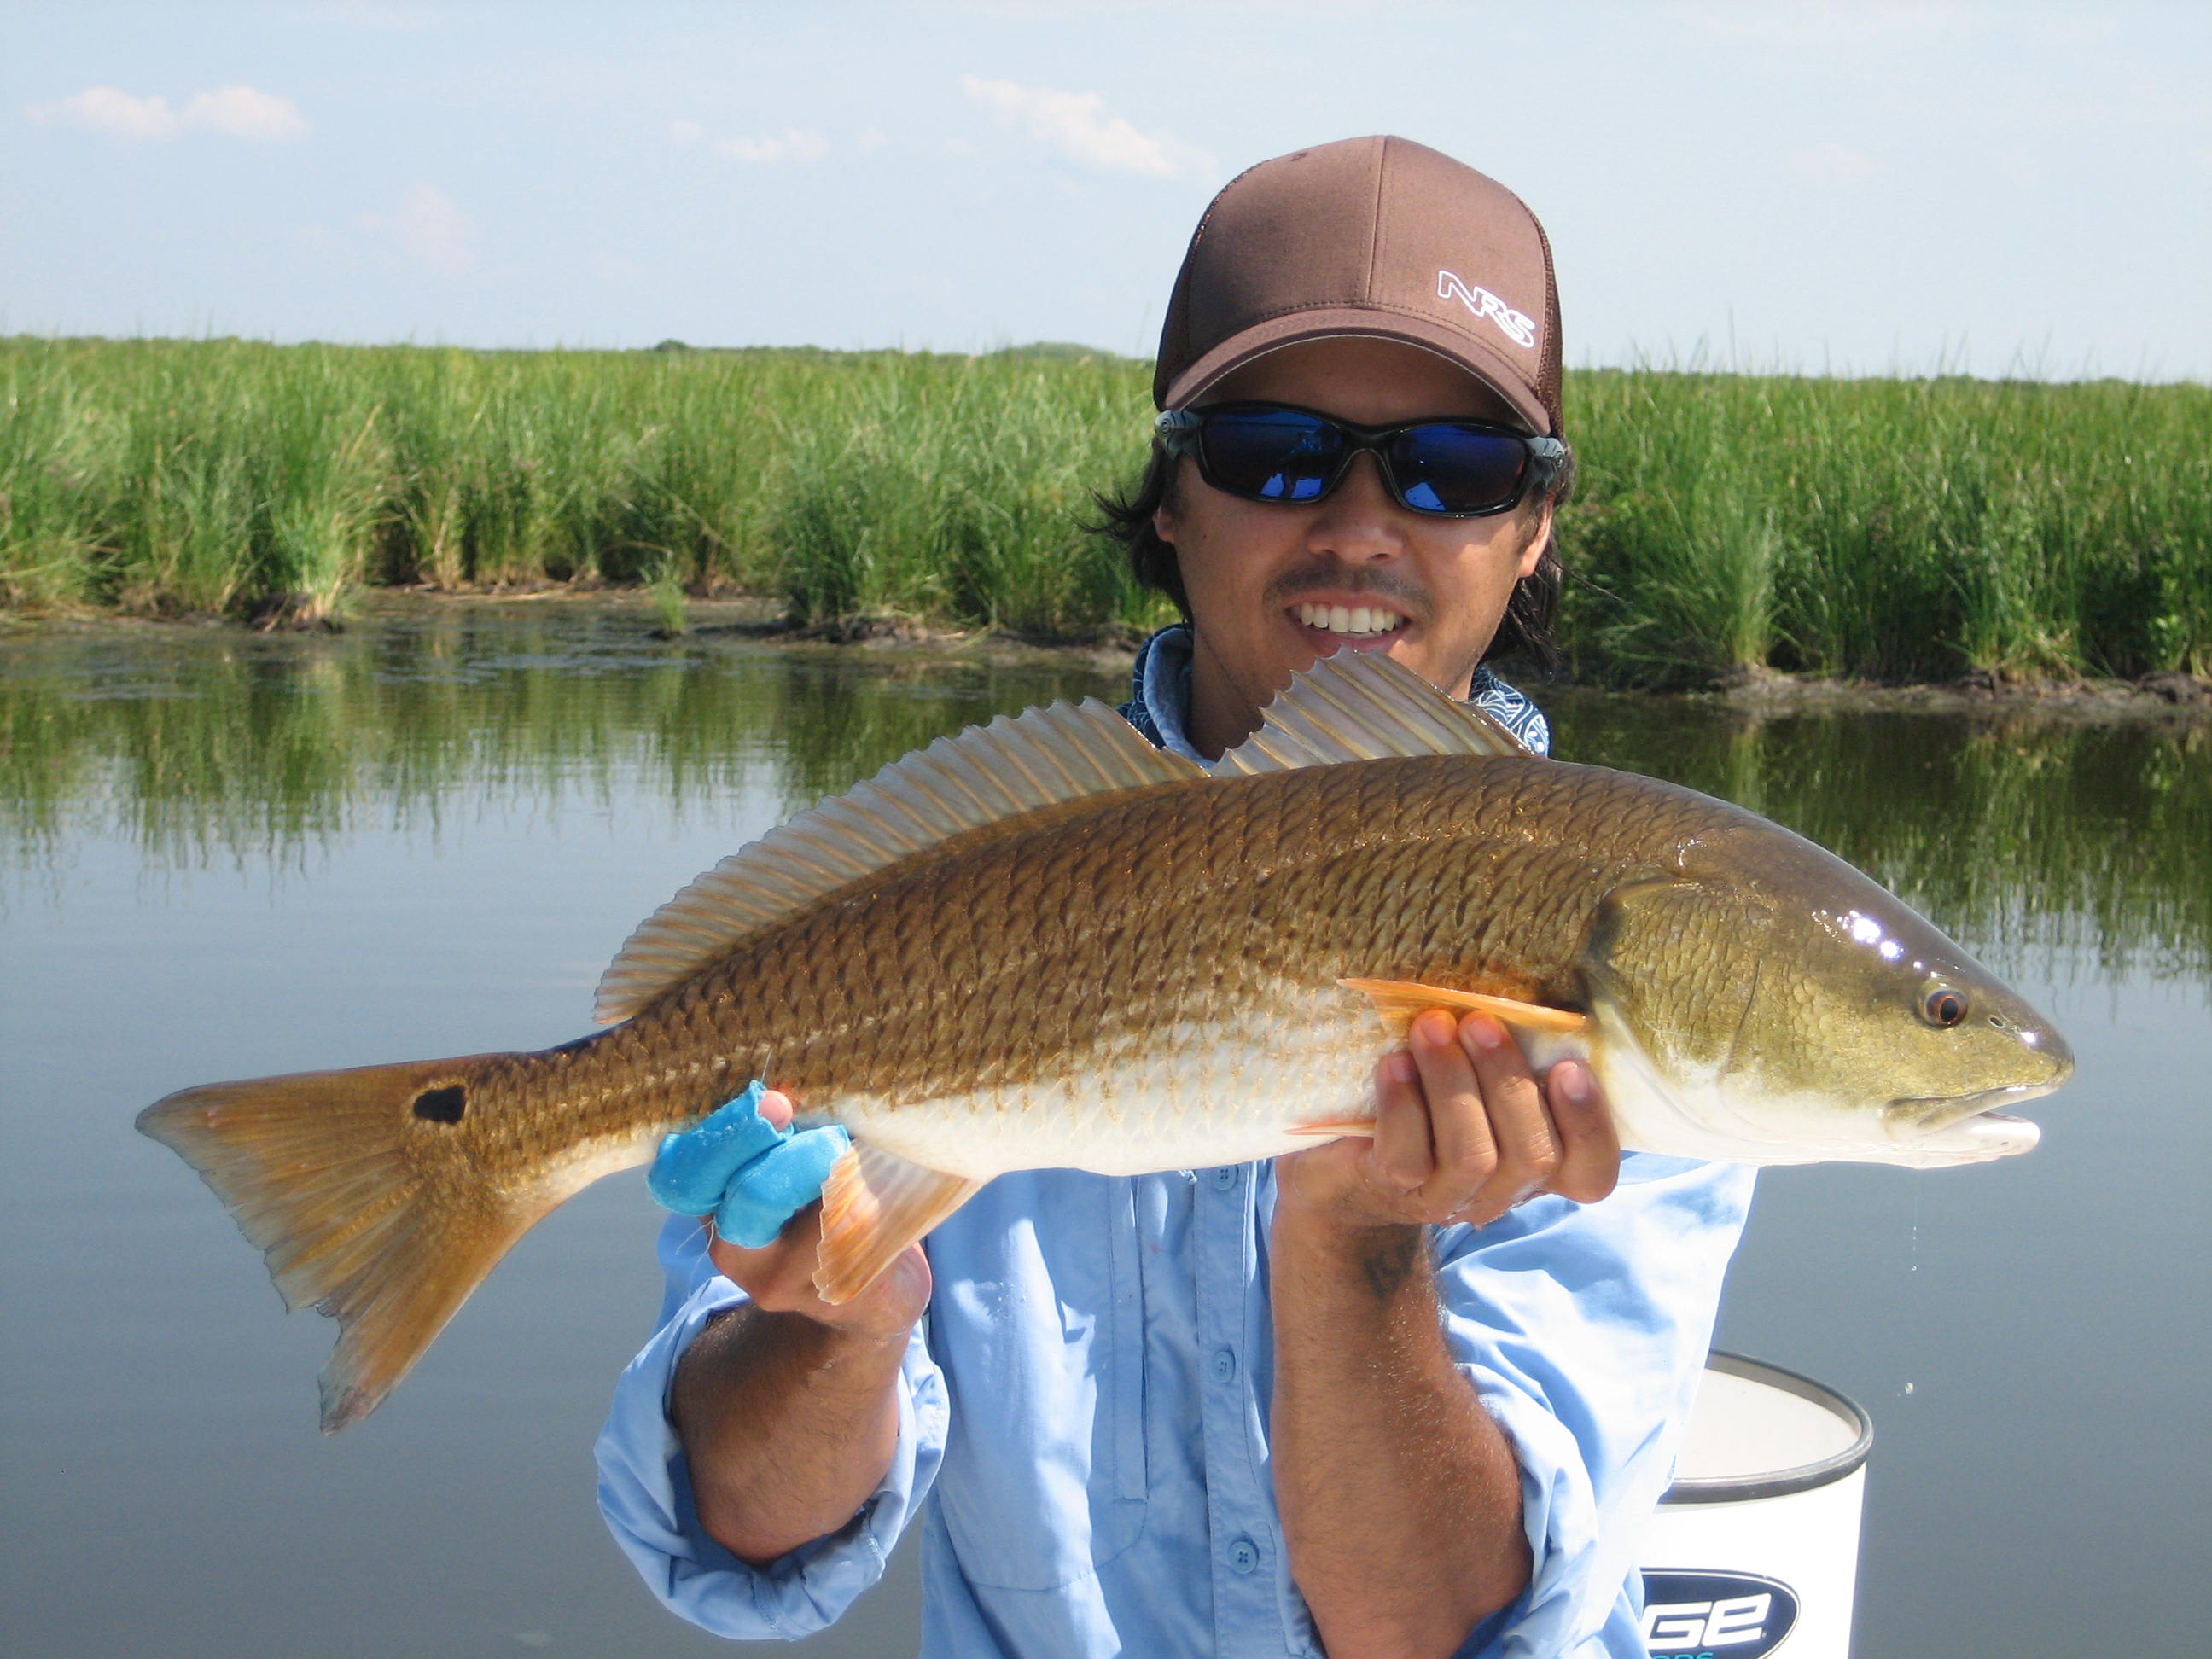 Catching a redfish in the marshy lands